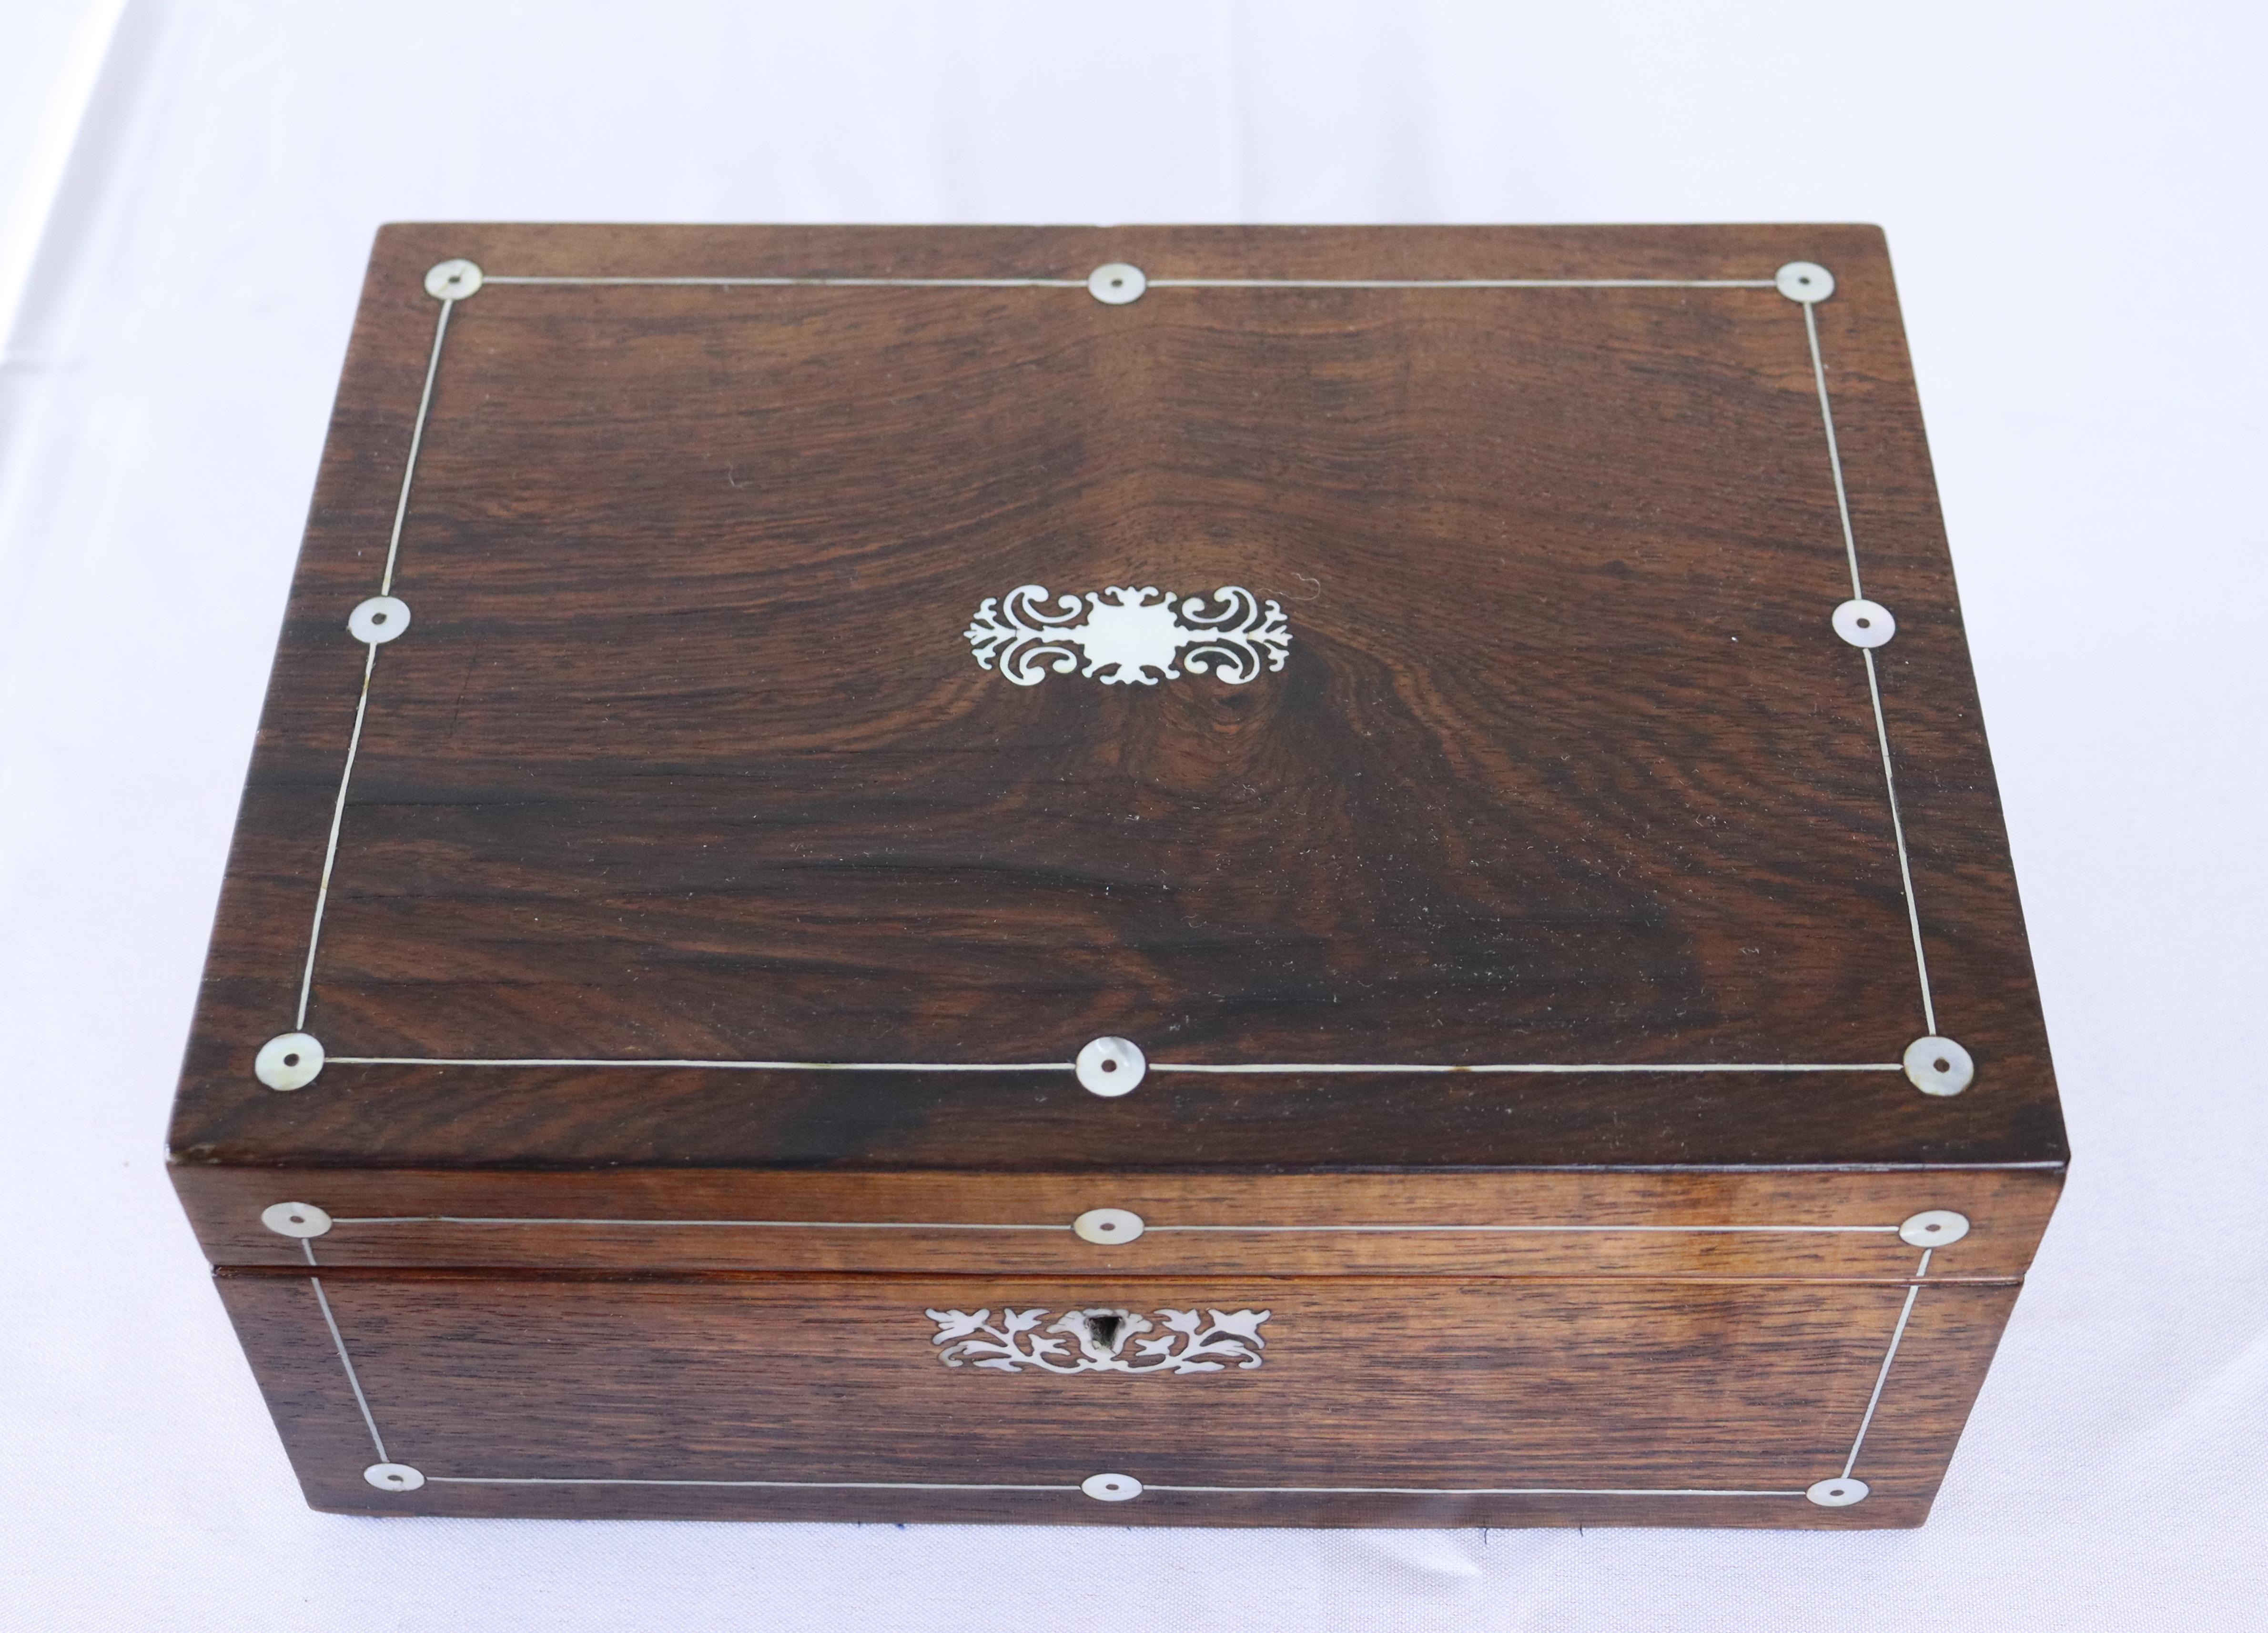 A lovely rosewood box from the Victorian period, beautifully inlaid with mother-of-pearl.  The interior has been lined with fresh watered paper, and is clean.  In lay is in good condition.  No key.